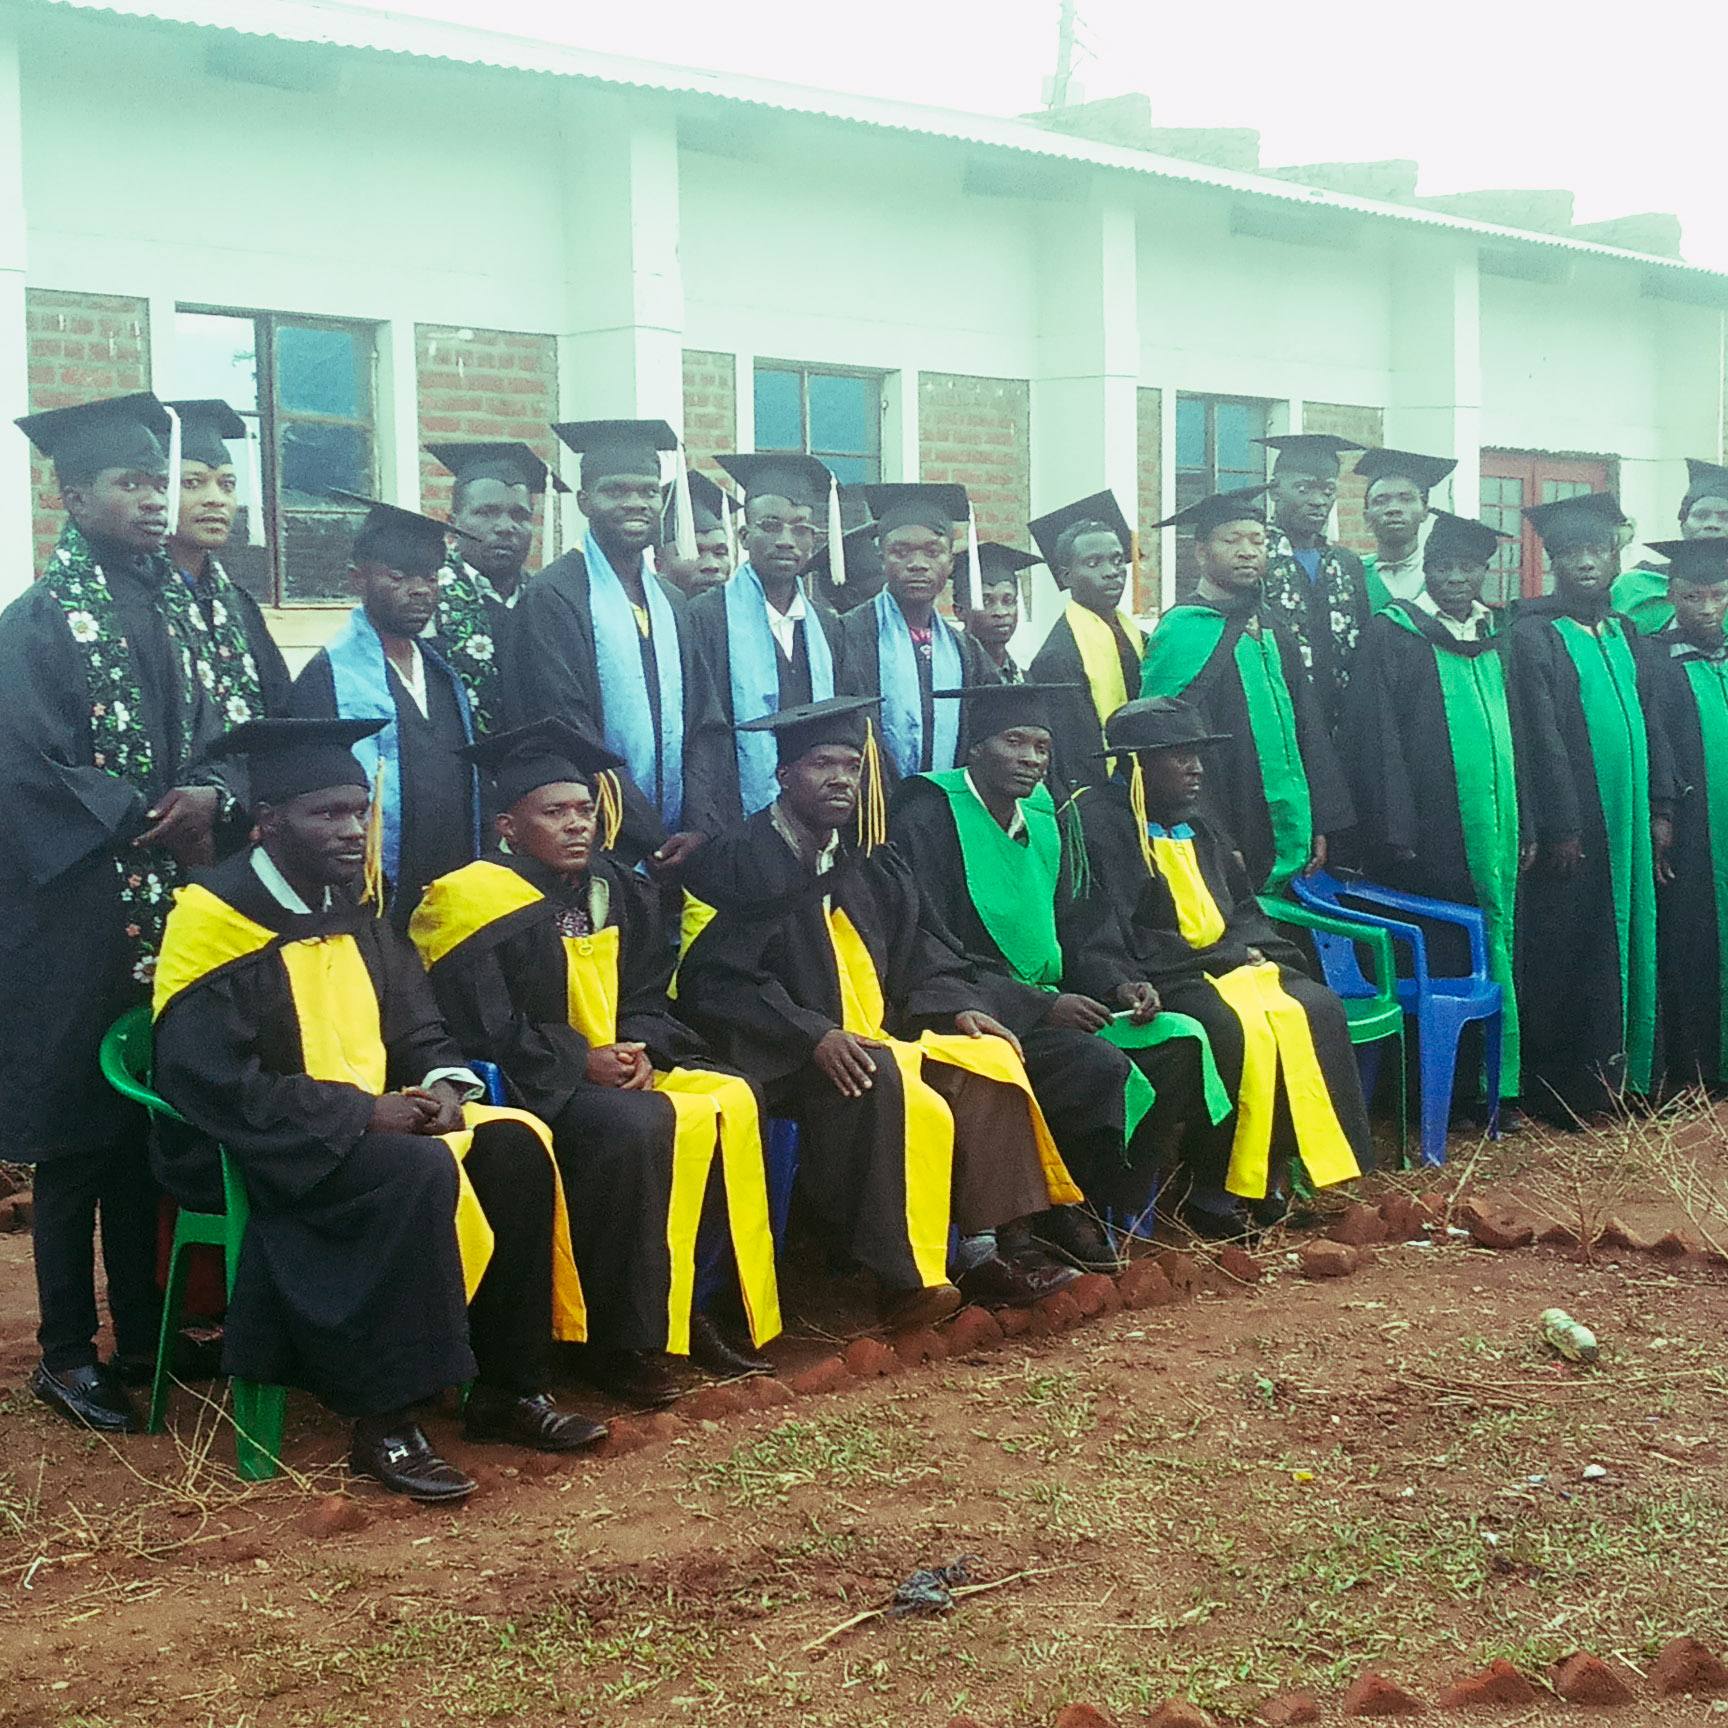 Graduate from Malawi Campus